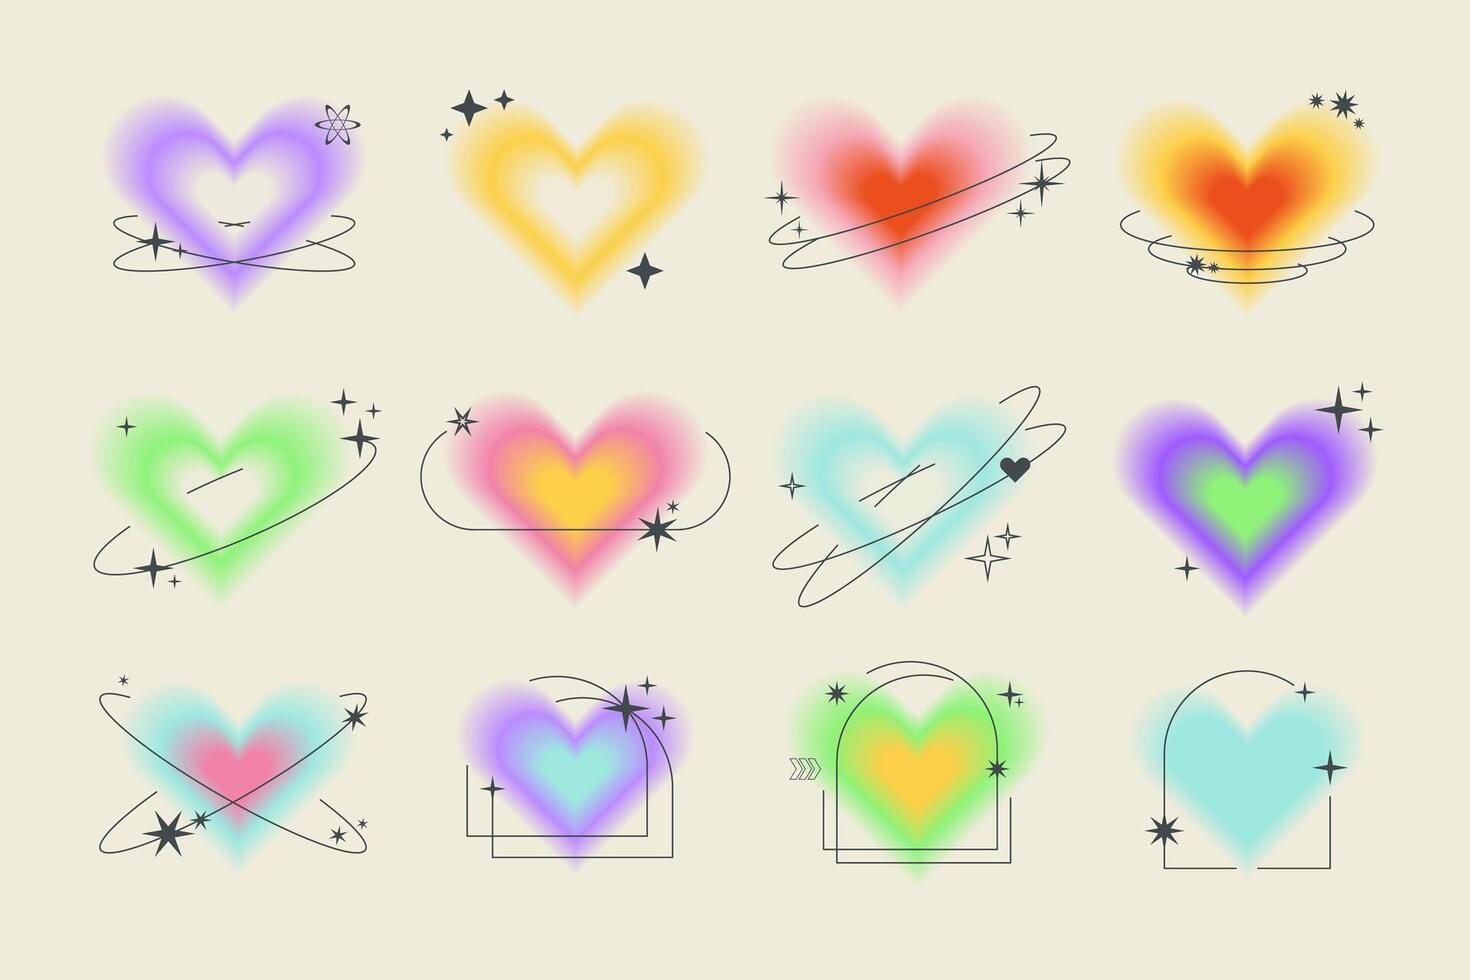 Y2k aesthetic blurred gradient aura hearts with linear circles, stars. Trendy set of modern blurry figures in brutalism style. Romantic transparent heart elements for social media background, posters vector